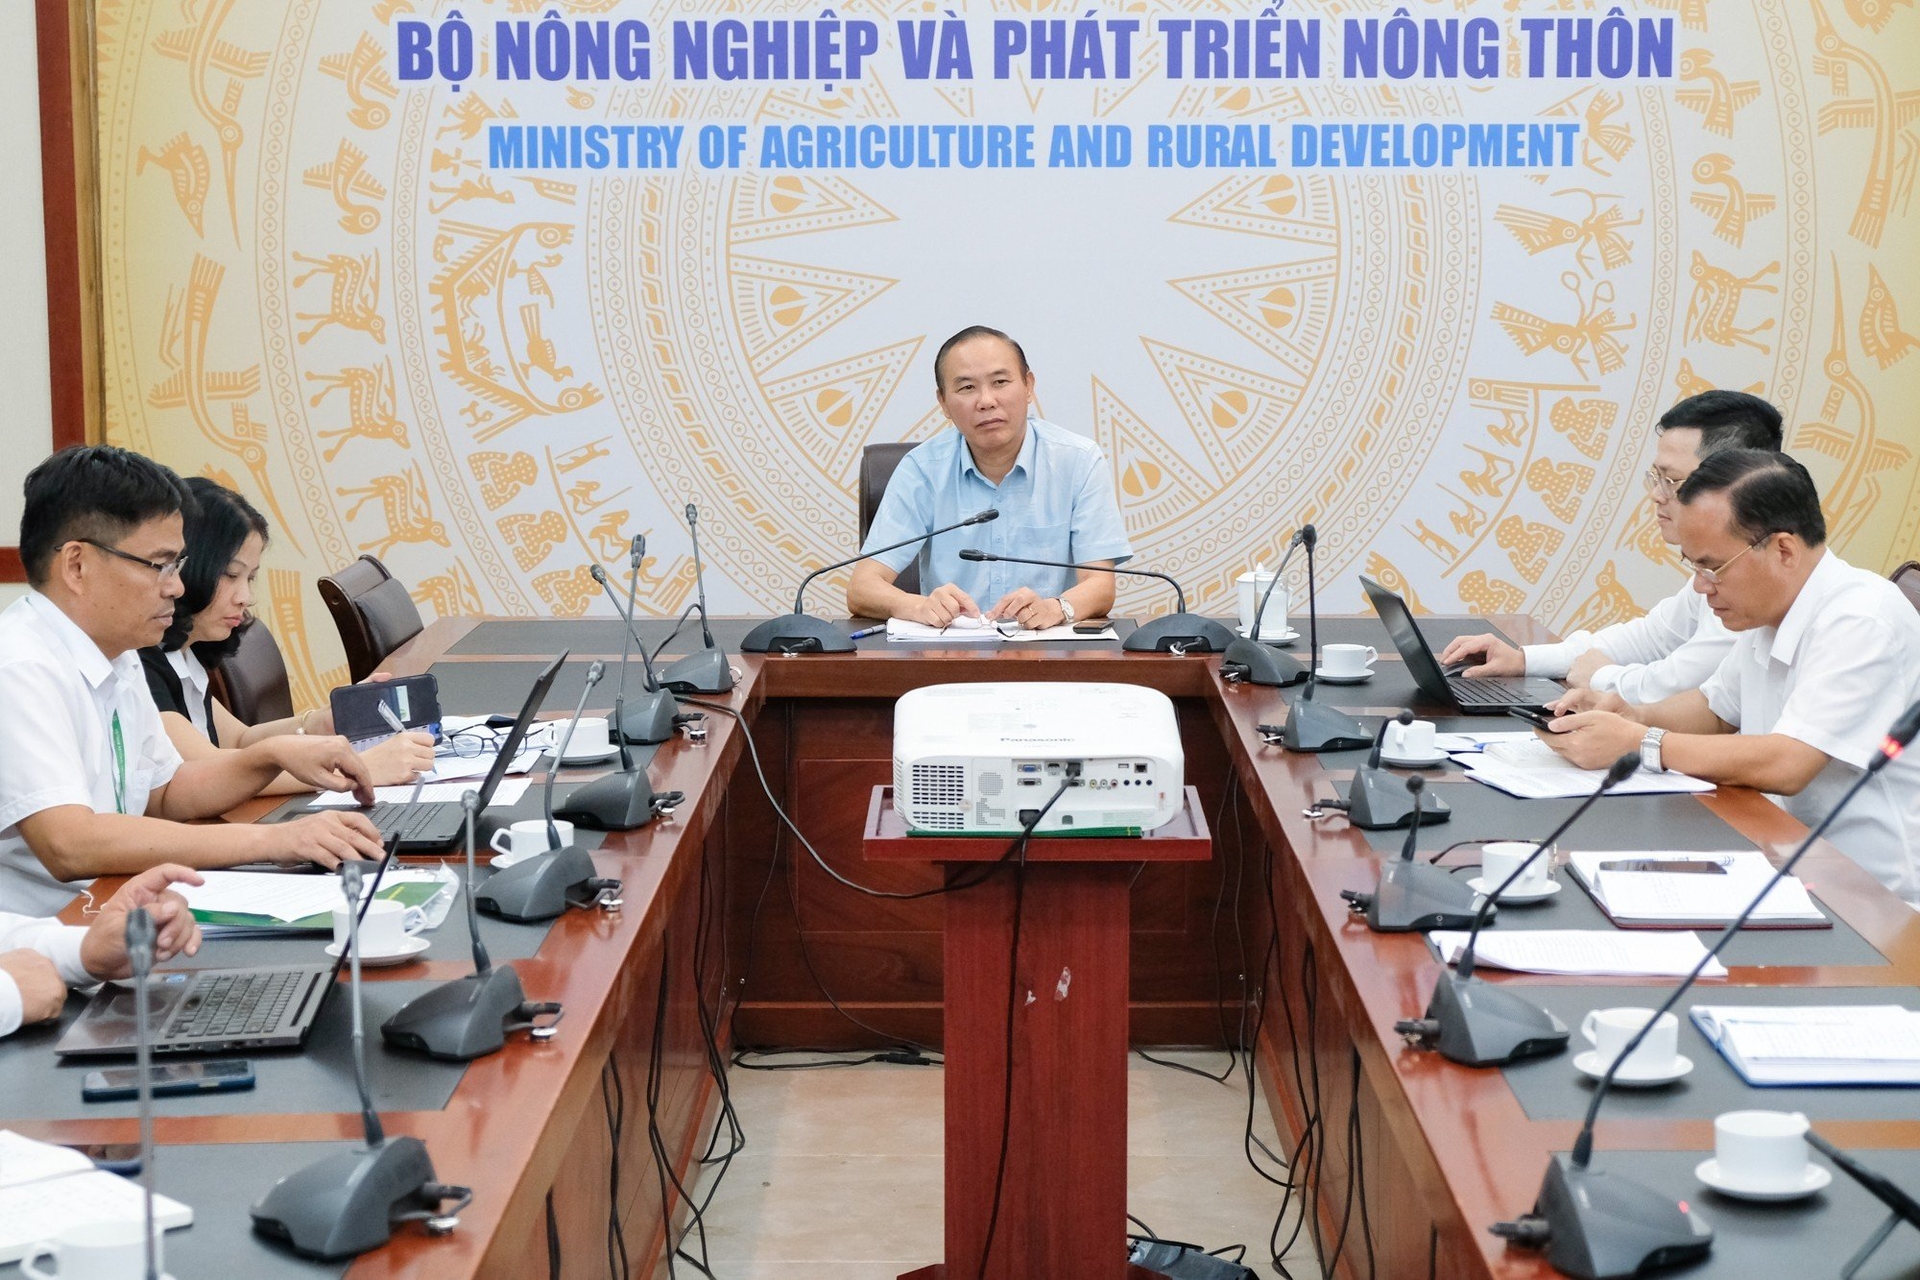 Deputy Minister Phung Duc Tien chaired the meeting with Vietnam National University of Agriculture. Photo: Tung Dinh.